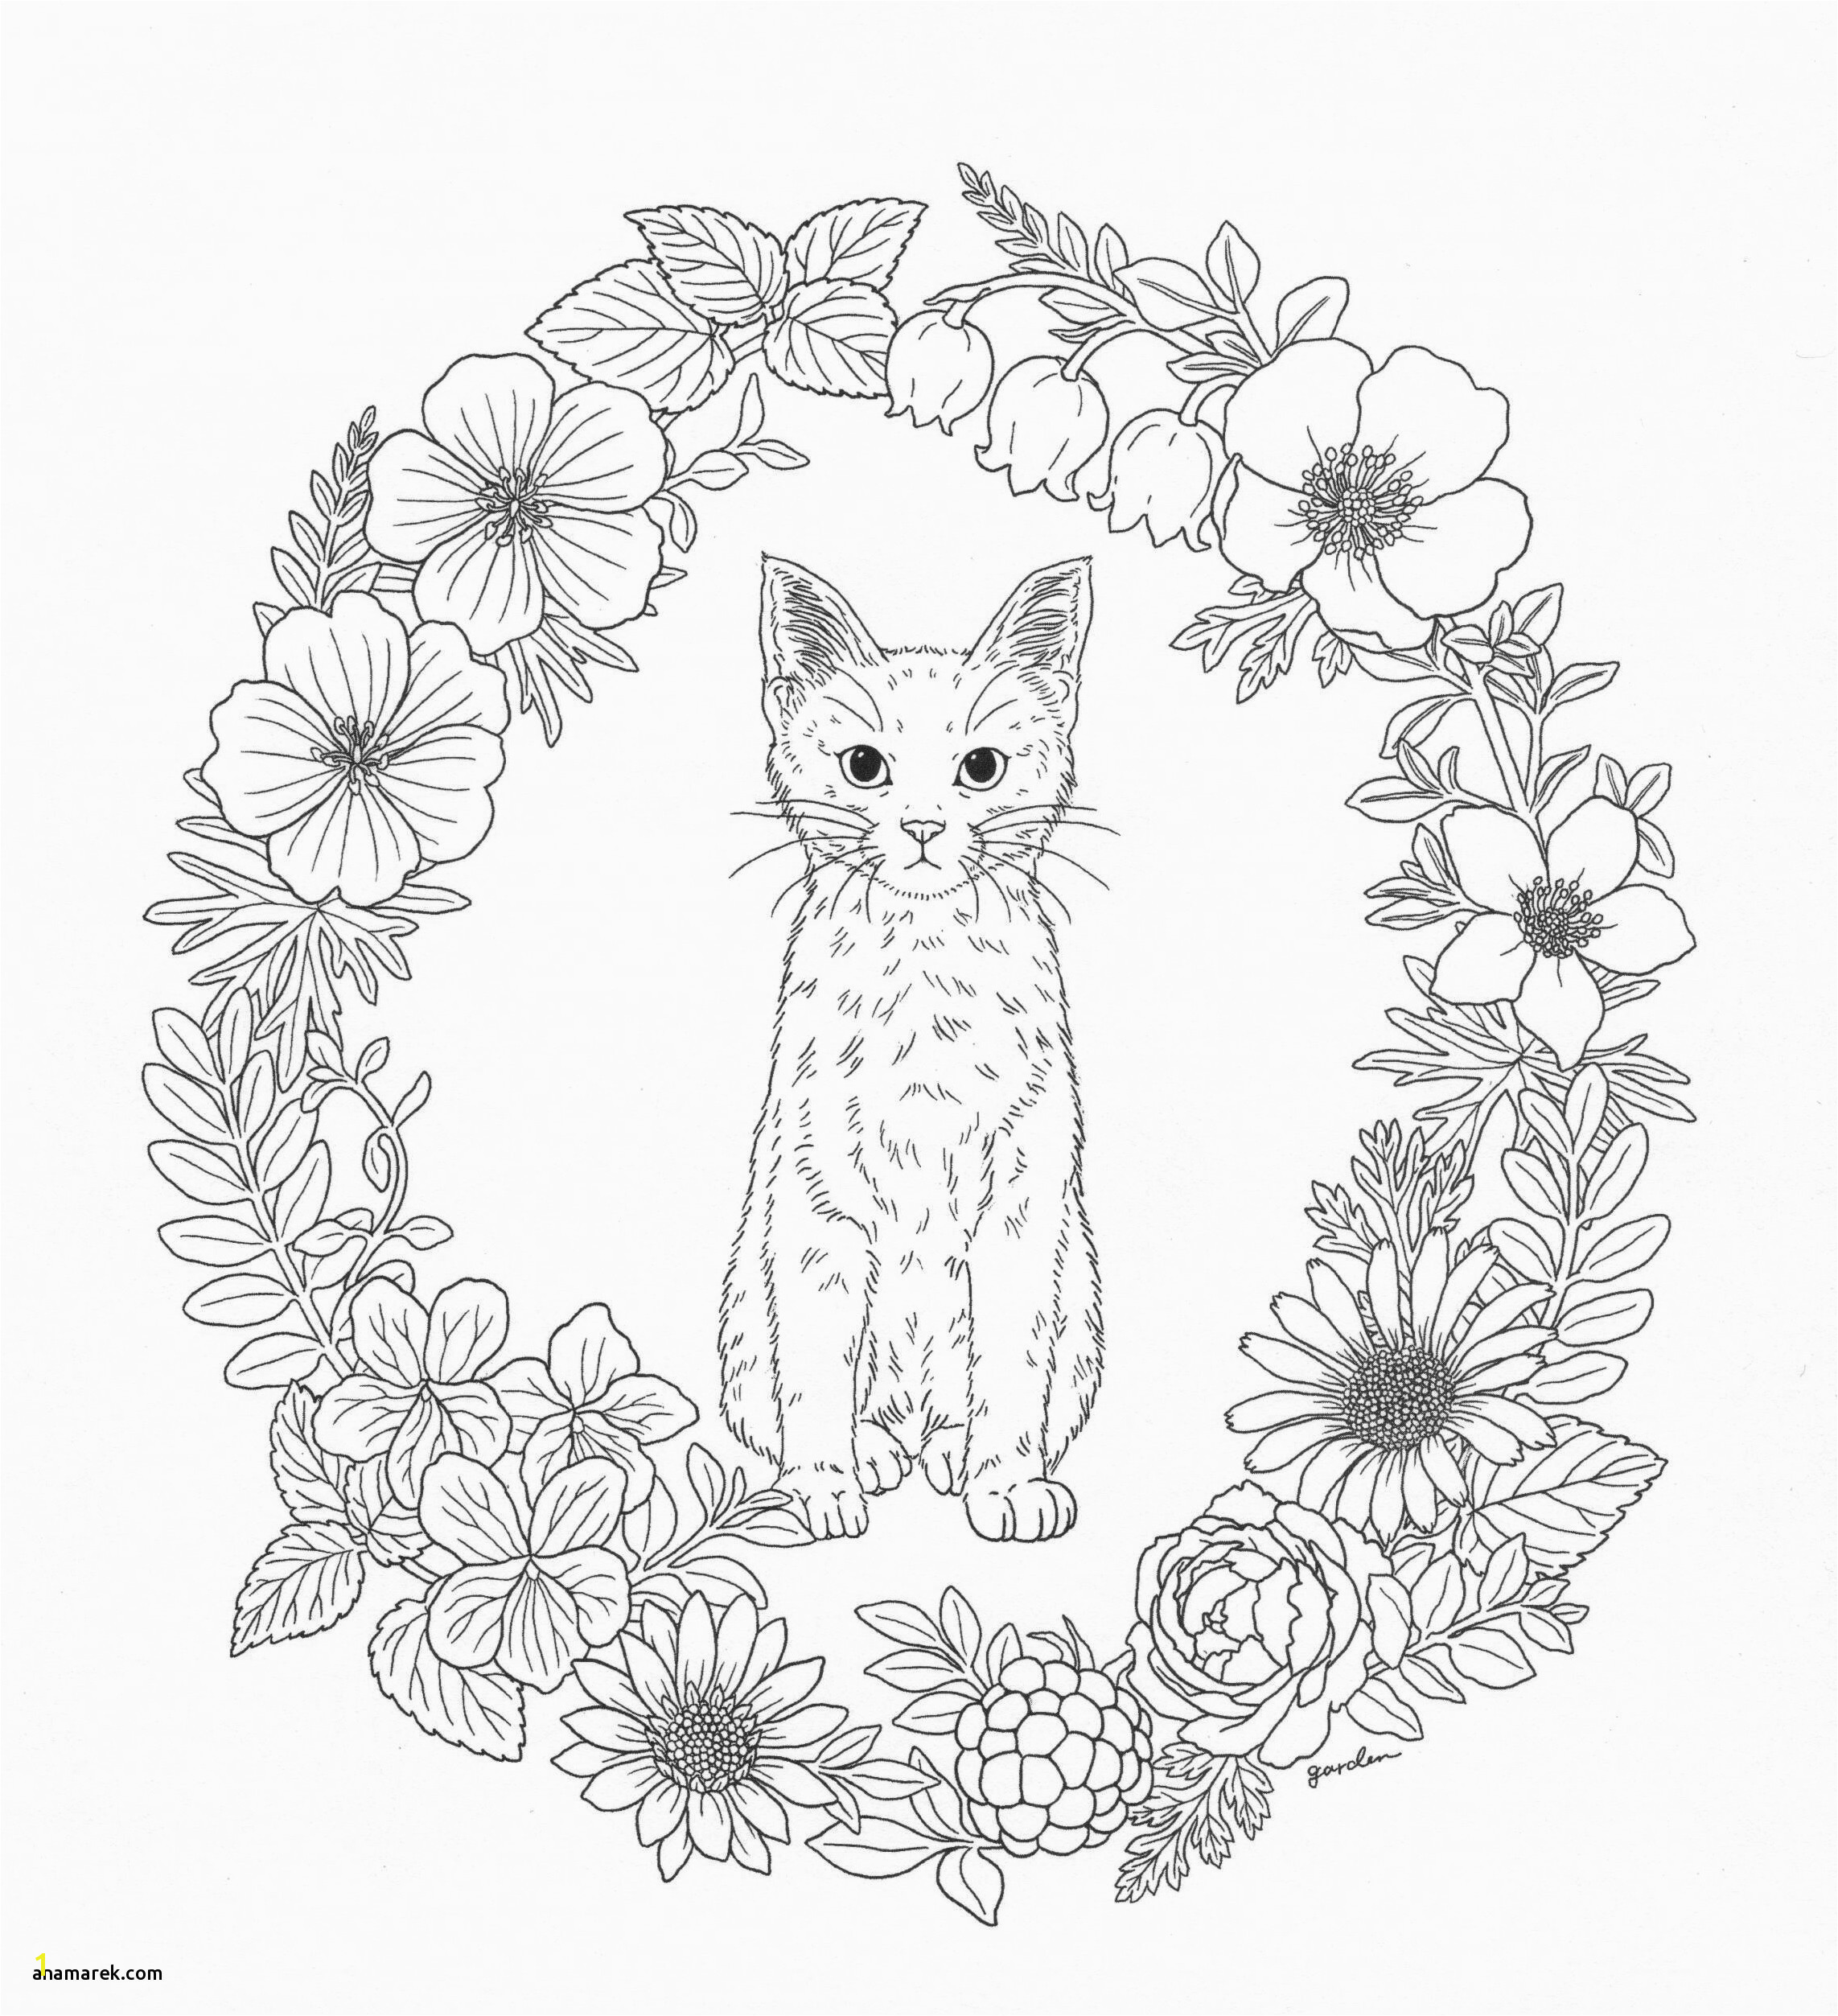 Melanie Martinez Cry Baby Coloring Pages Fresh Melanie Martinez Cry Baby Coloring Book Pages Flower